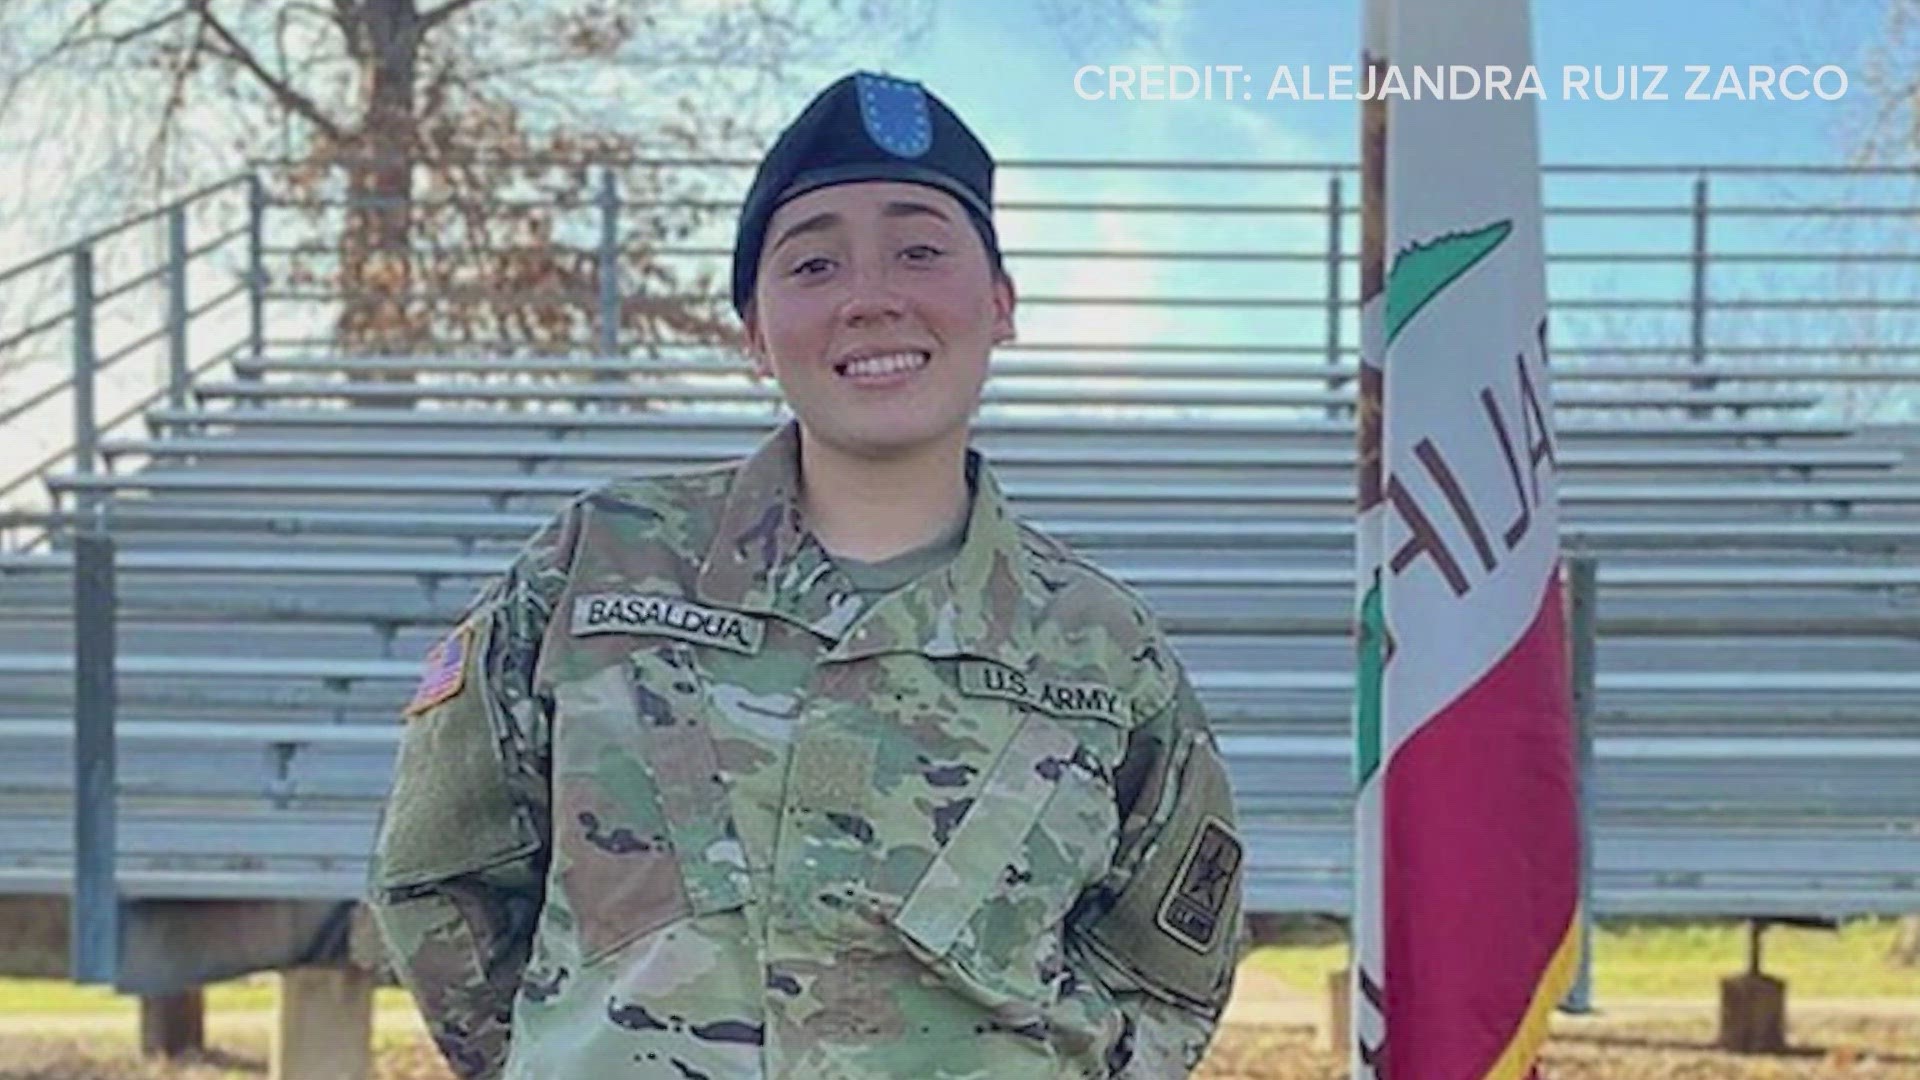 1st Cavalry Division Soldier Pvt. Ana Basaldua Ruiz reportedly told family she had been sexually harassed. Investigators do not believe there was any foul play.